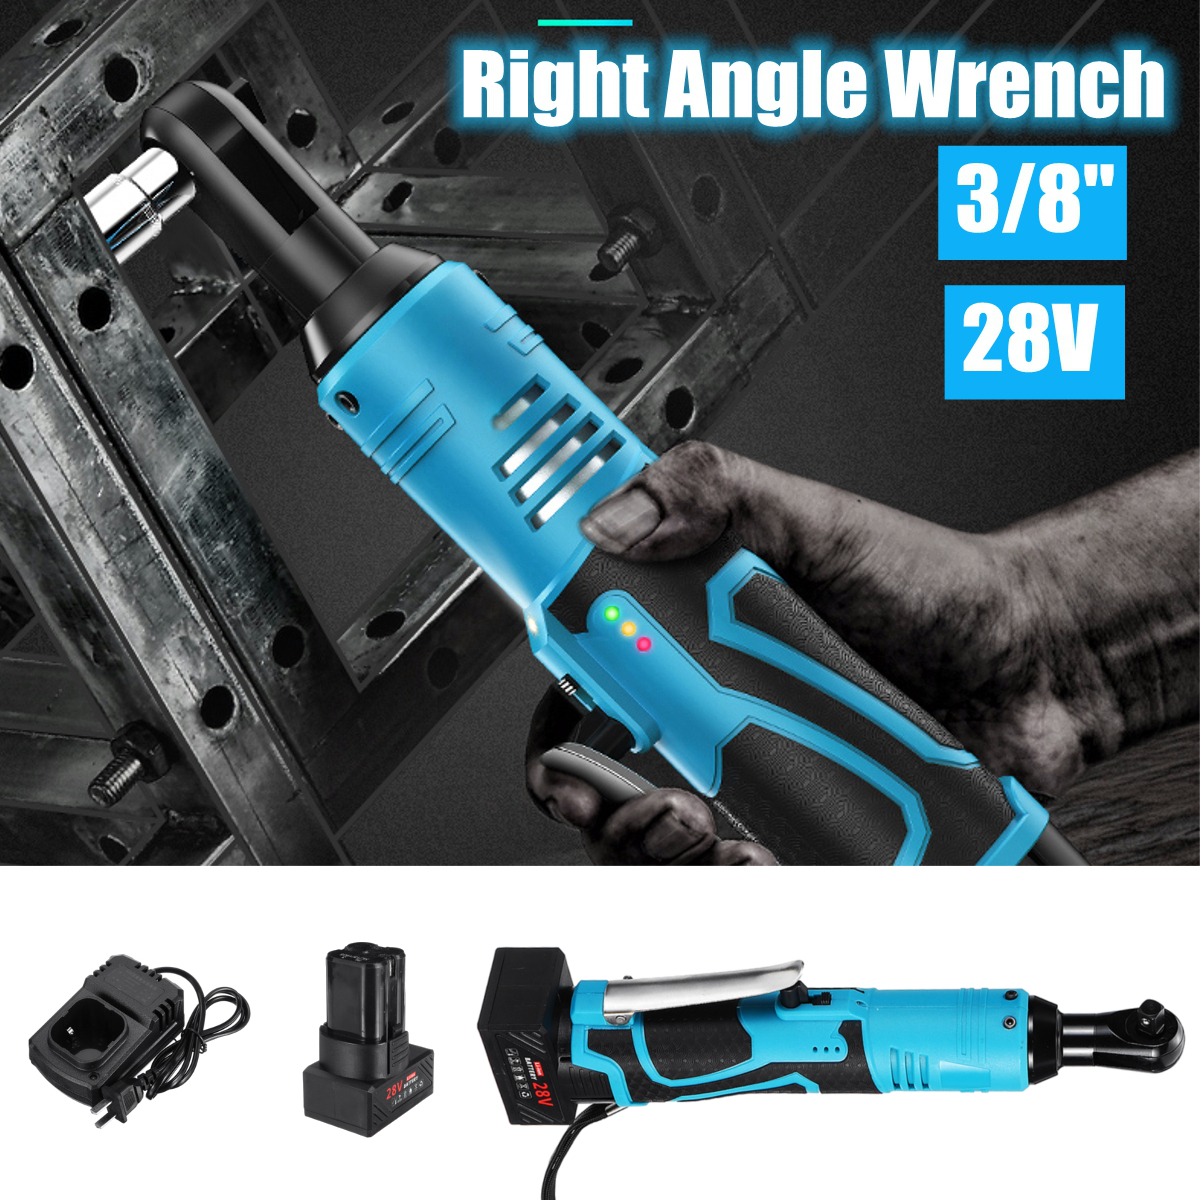 28V-60Nm-Electric-Cordless-90deg-Ratchet-Wrench-38quot-Portable-8000mAh-Rechargeable-Battery-Right-A-1477209-2